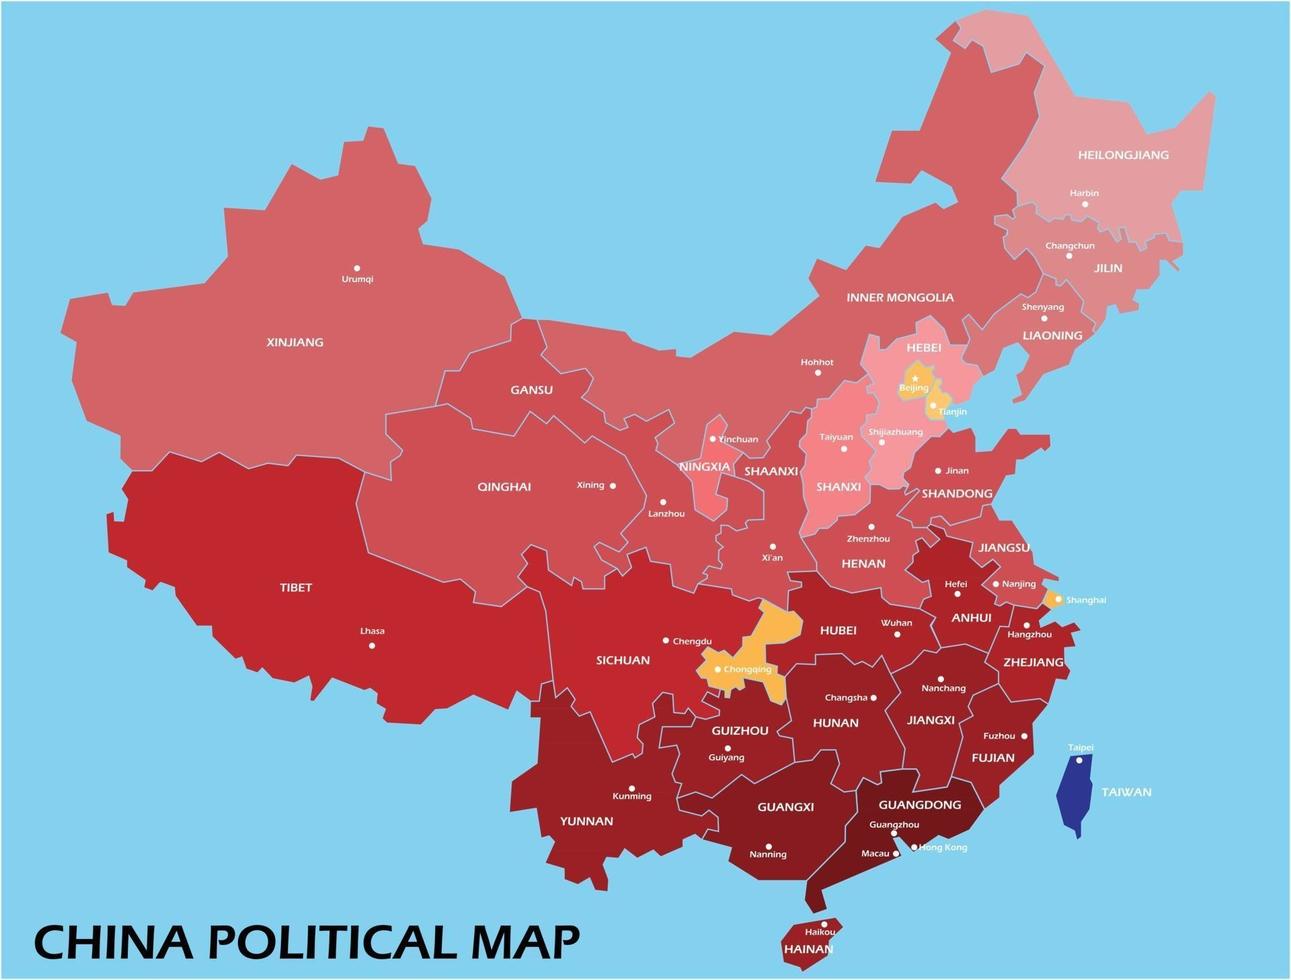 China political map divide by state colorful outline simplicity style. vector